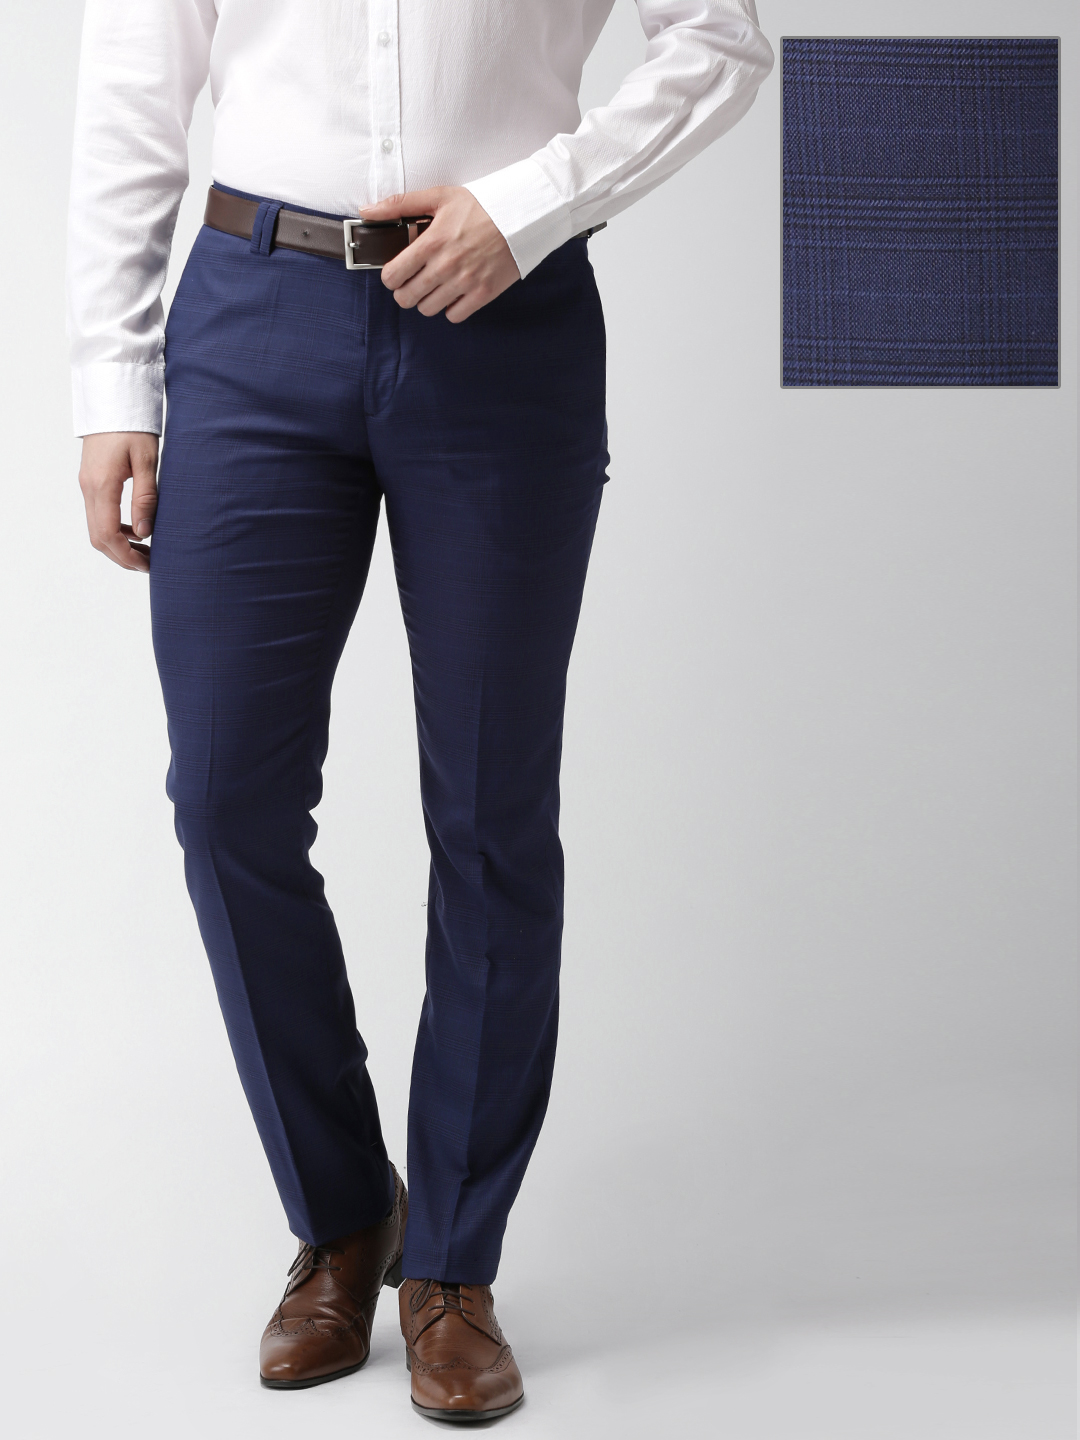 Buy INVICTUS Men Blue & Black Slim Fit Checked Formal Trousers - Trousers  for Men 2149747 | Myntra - Price History